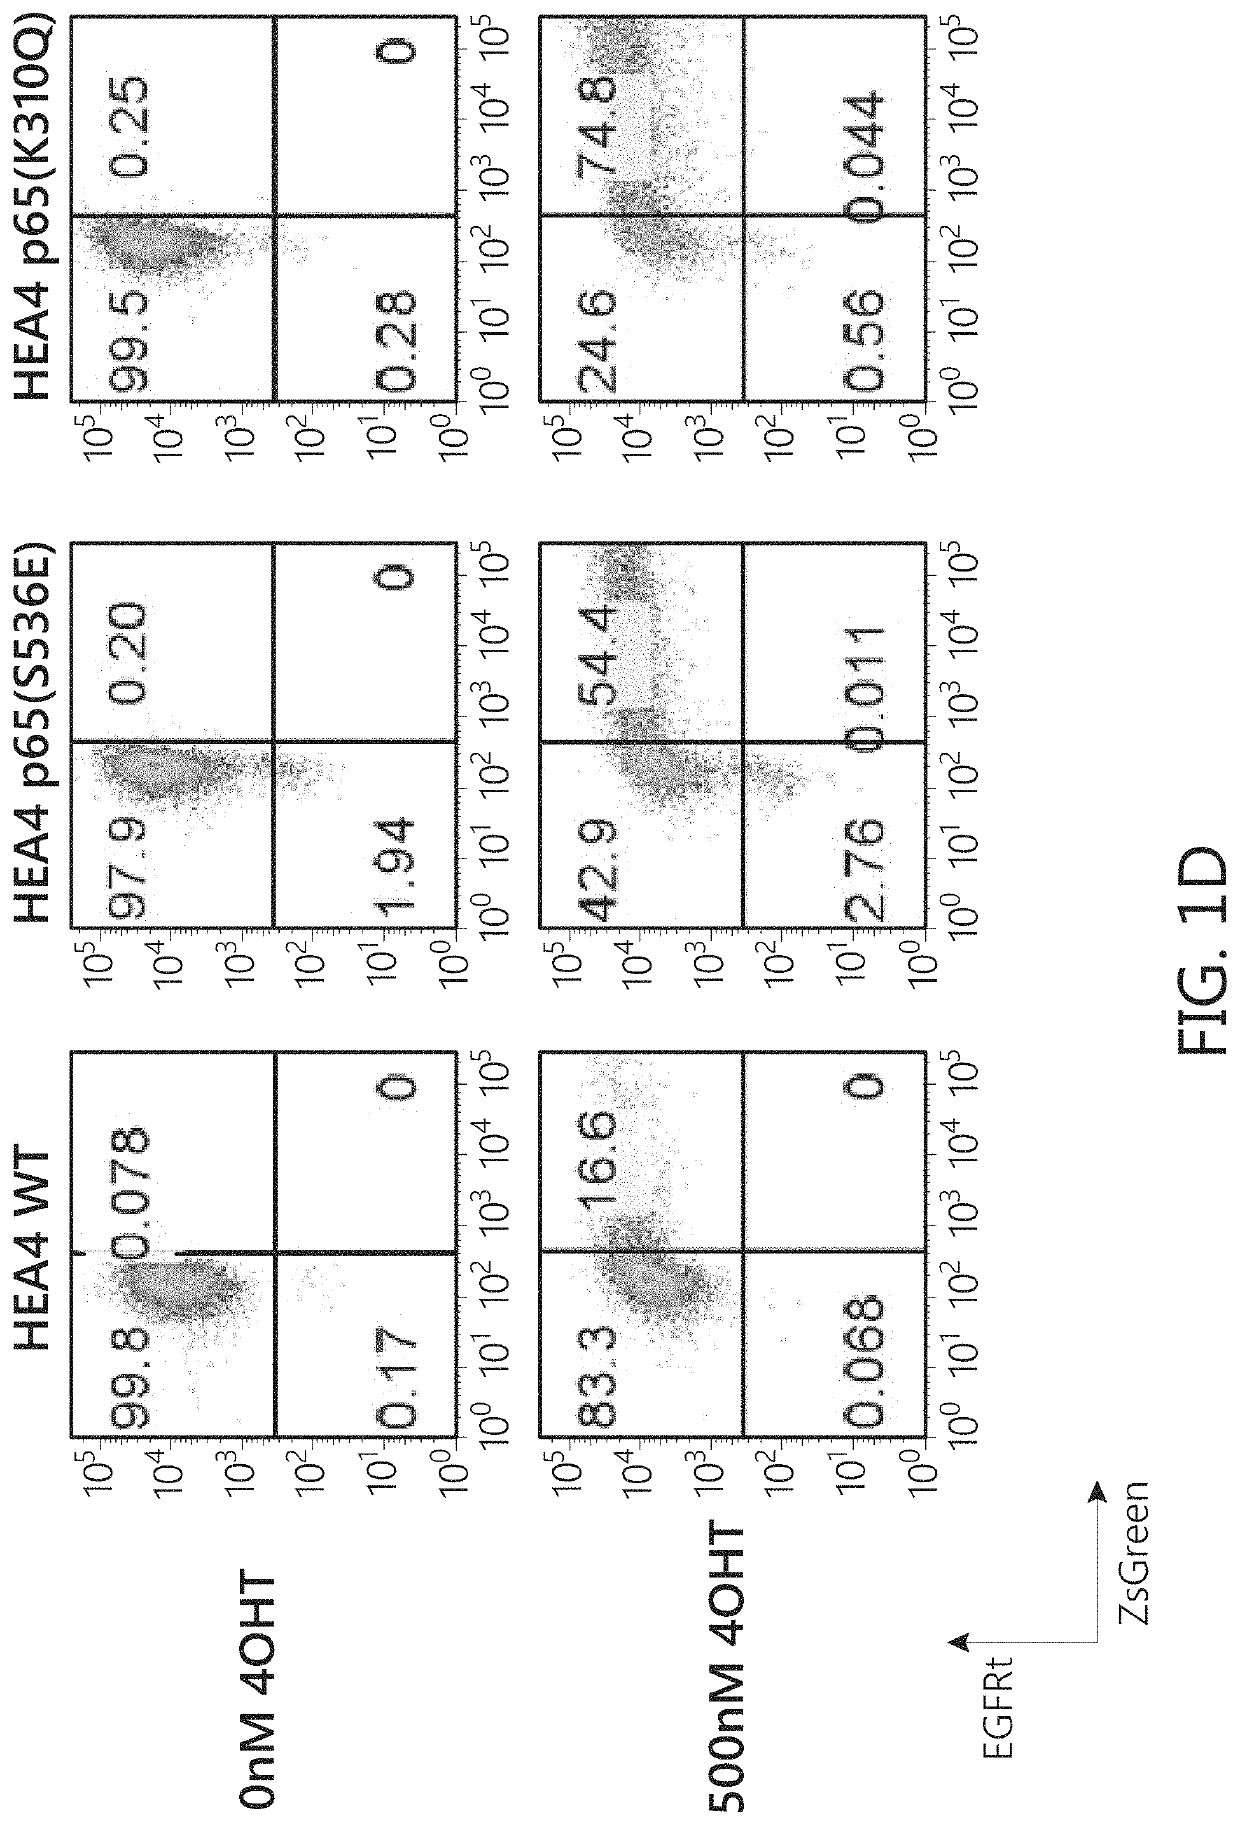 Chimeric transcription factor variants with augmented sensitivity to drug ligand induction of transgene expression in mammalian cells